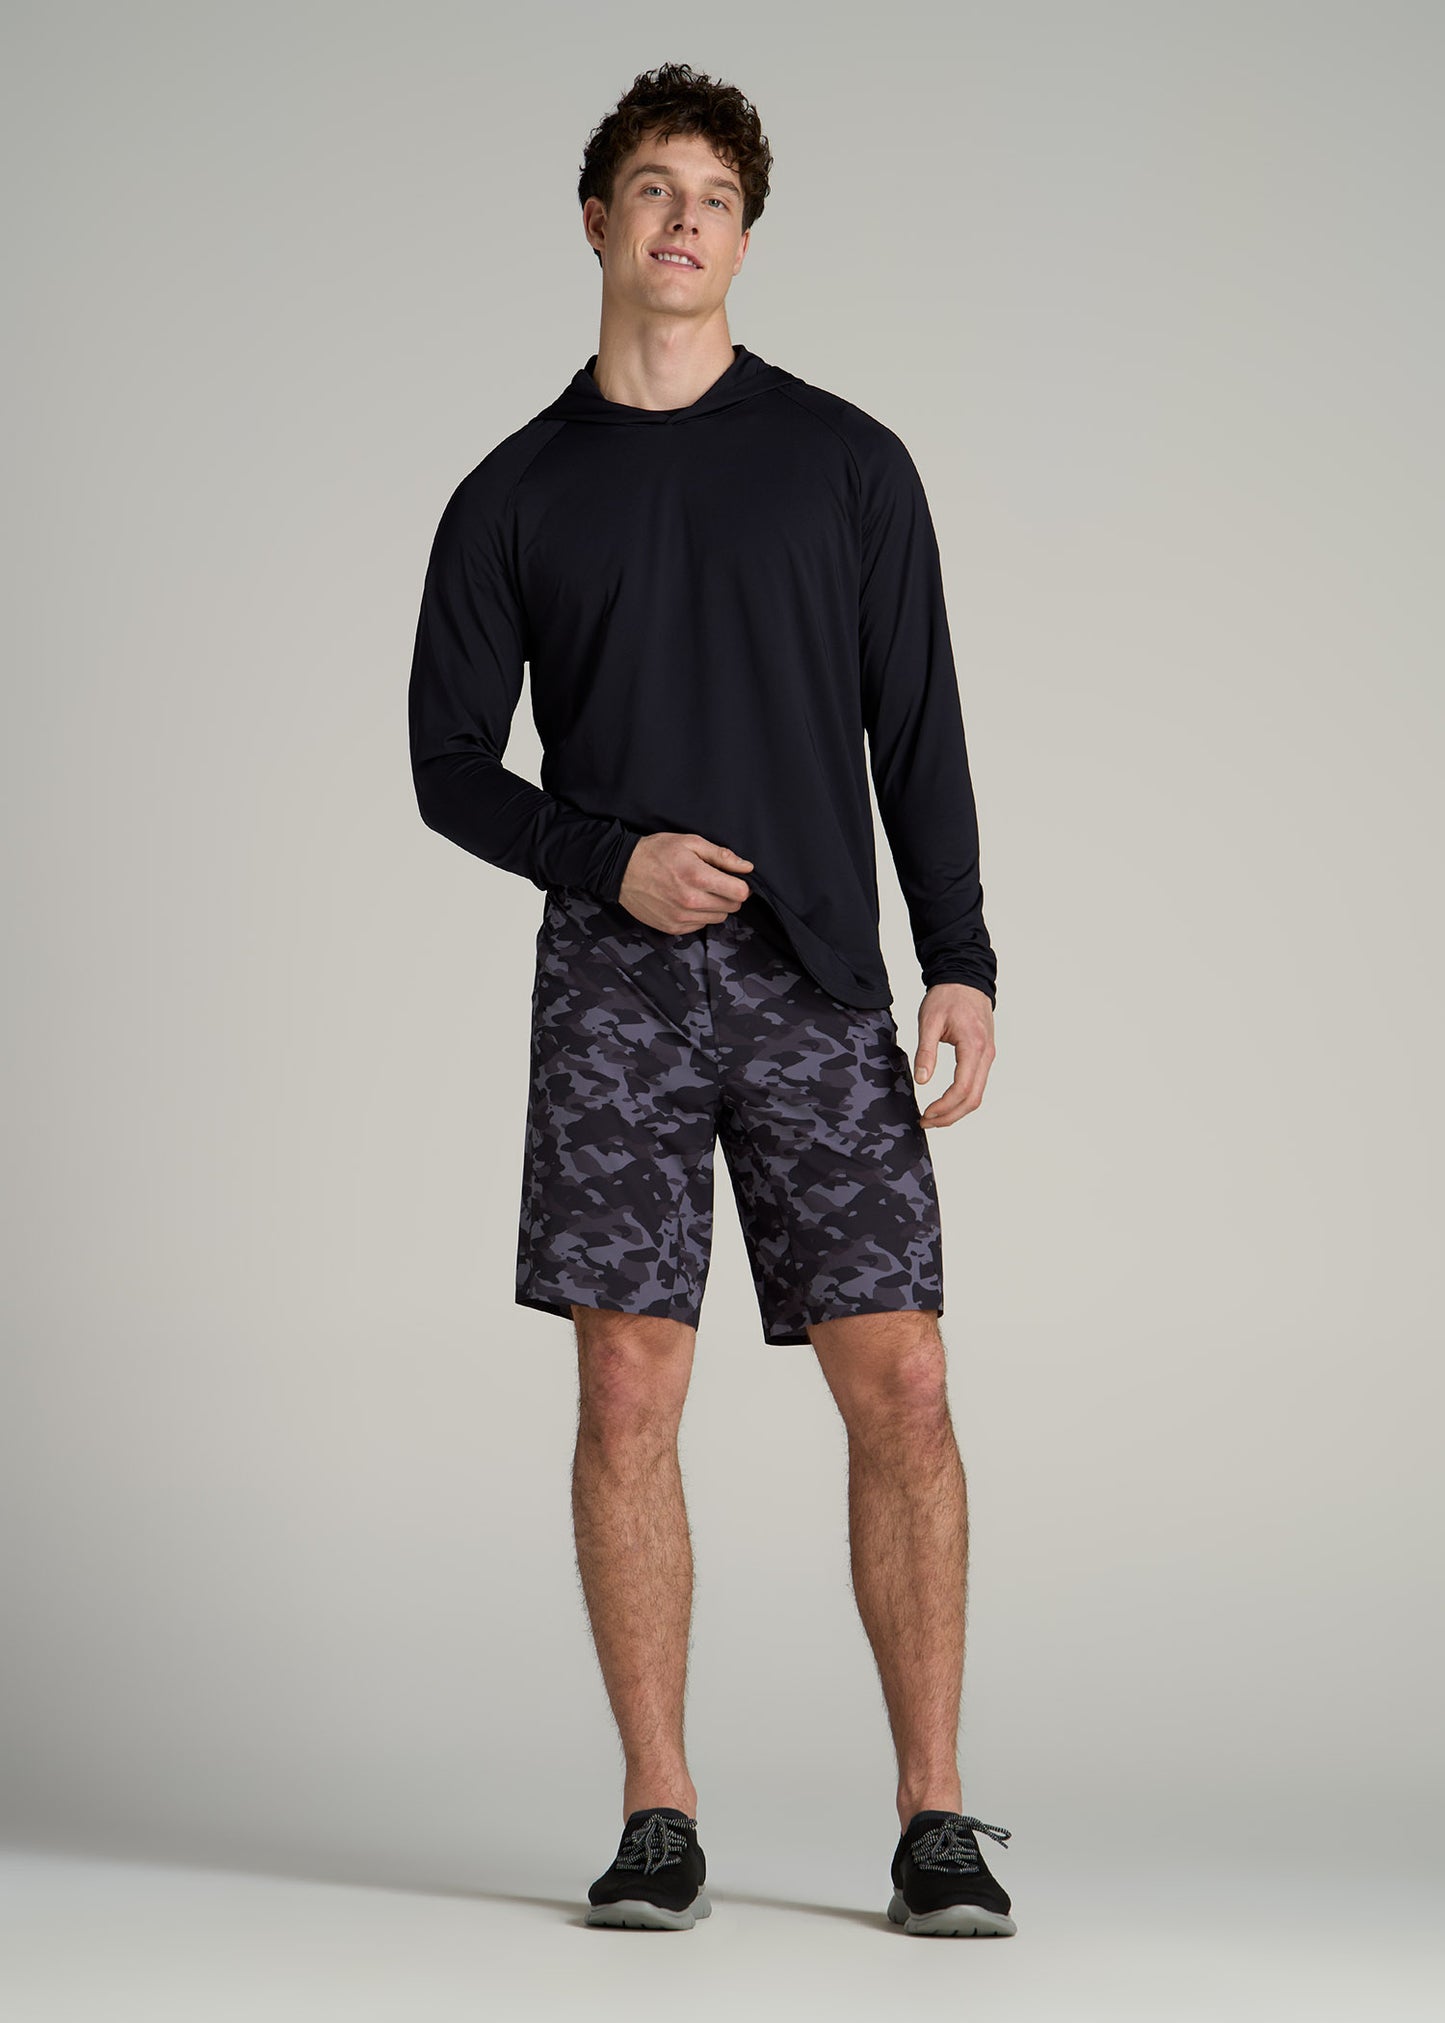 Featherweight Perforated Training Shorts for Tall Men in Black Camo